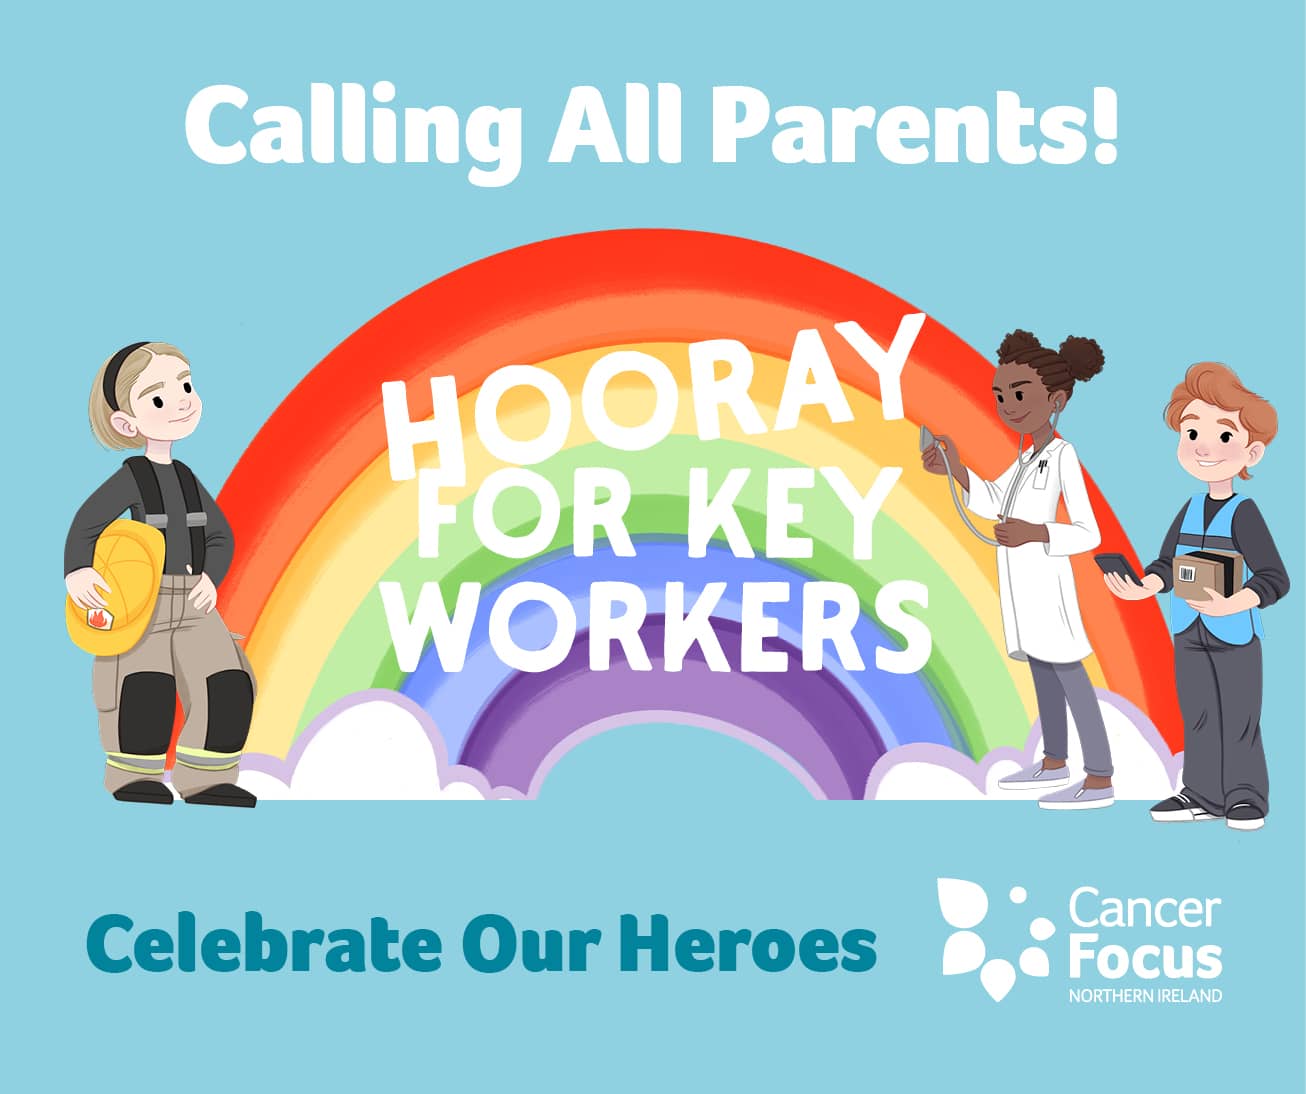 Hooray for Key Workers! Cancer Focus NI are Calling all Primary Schools!